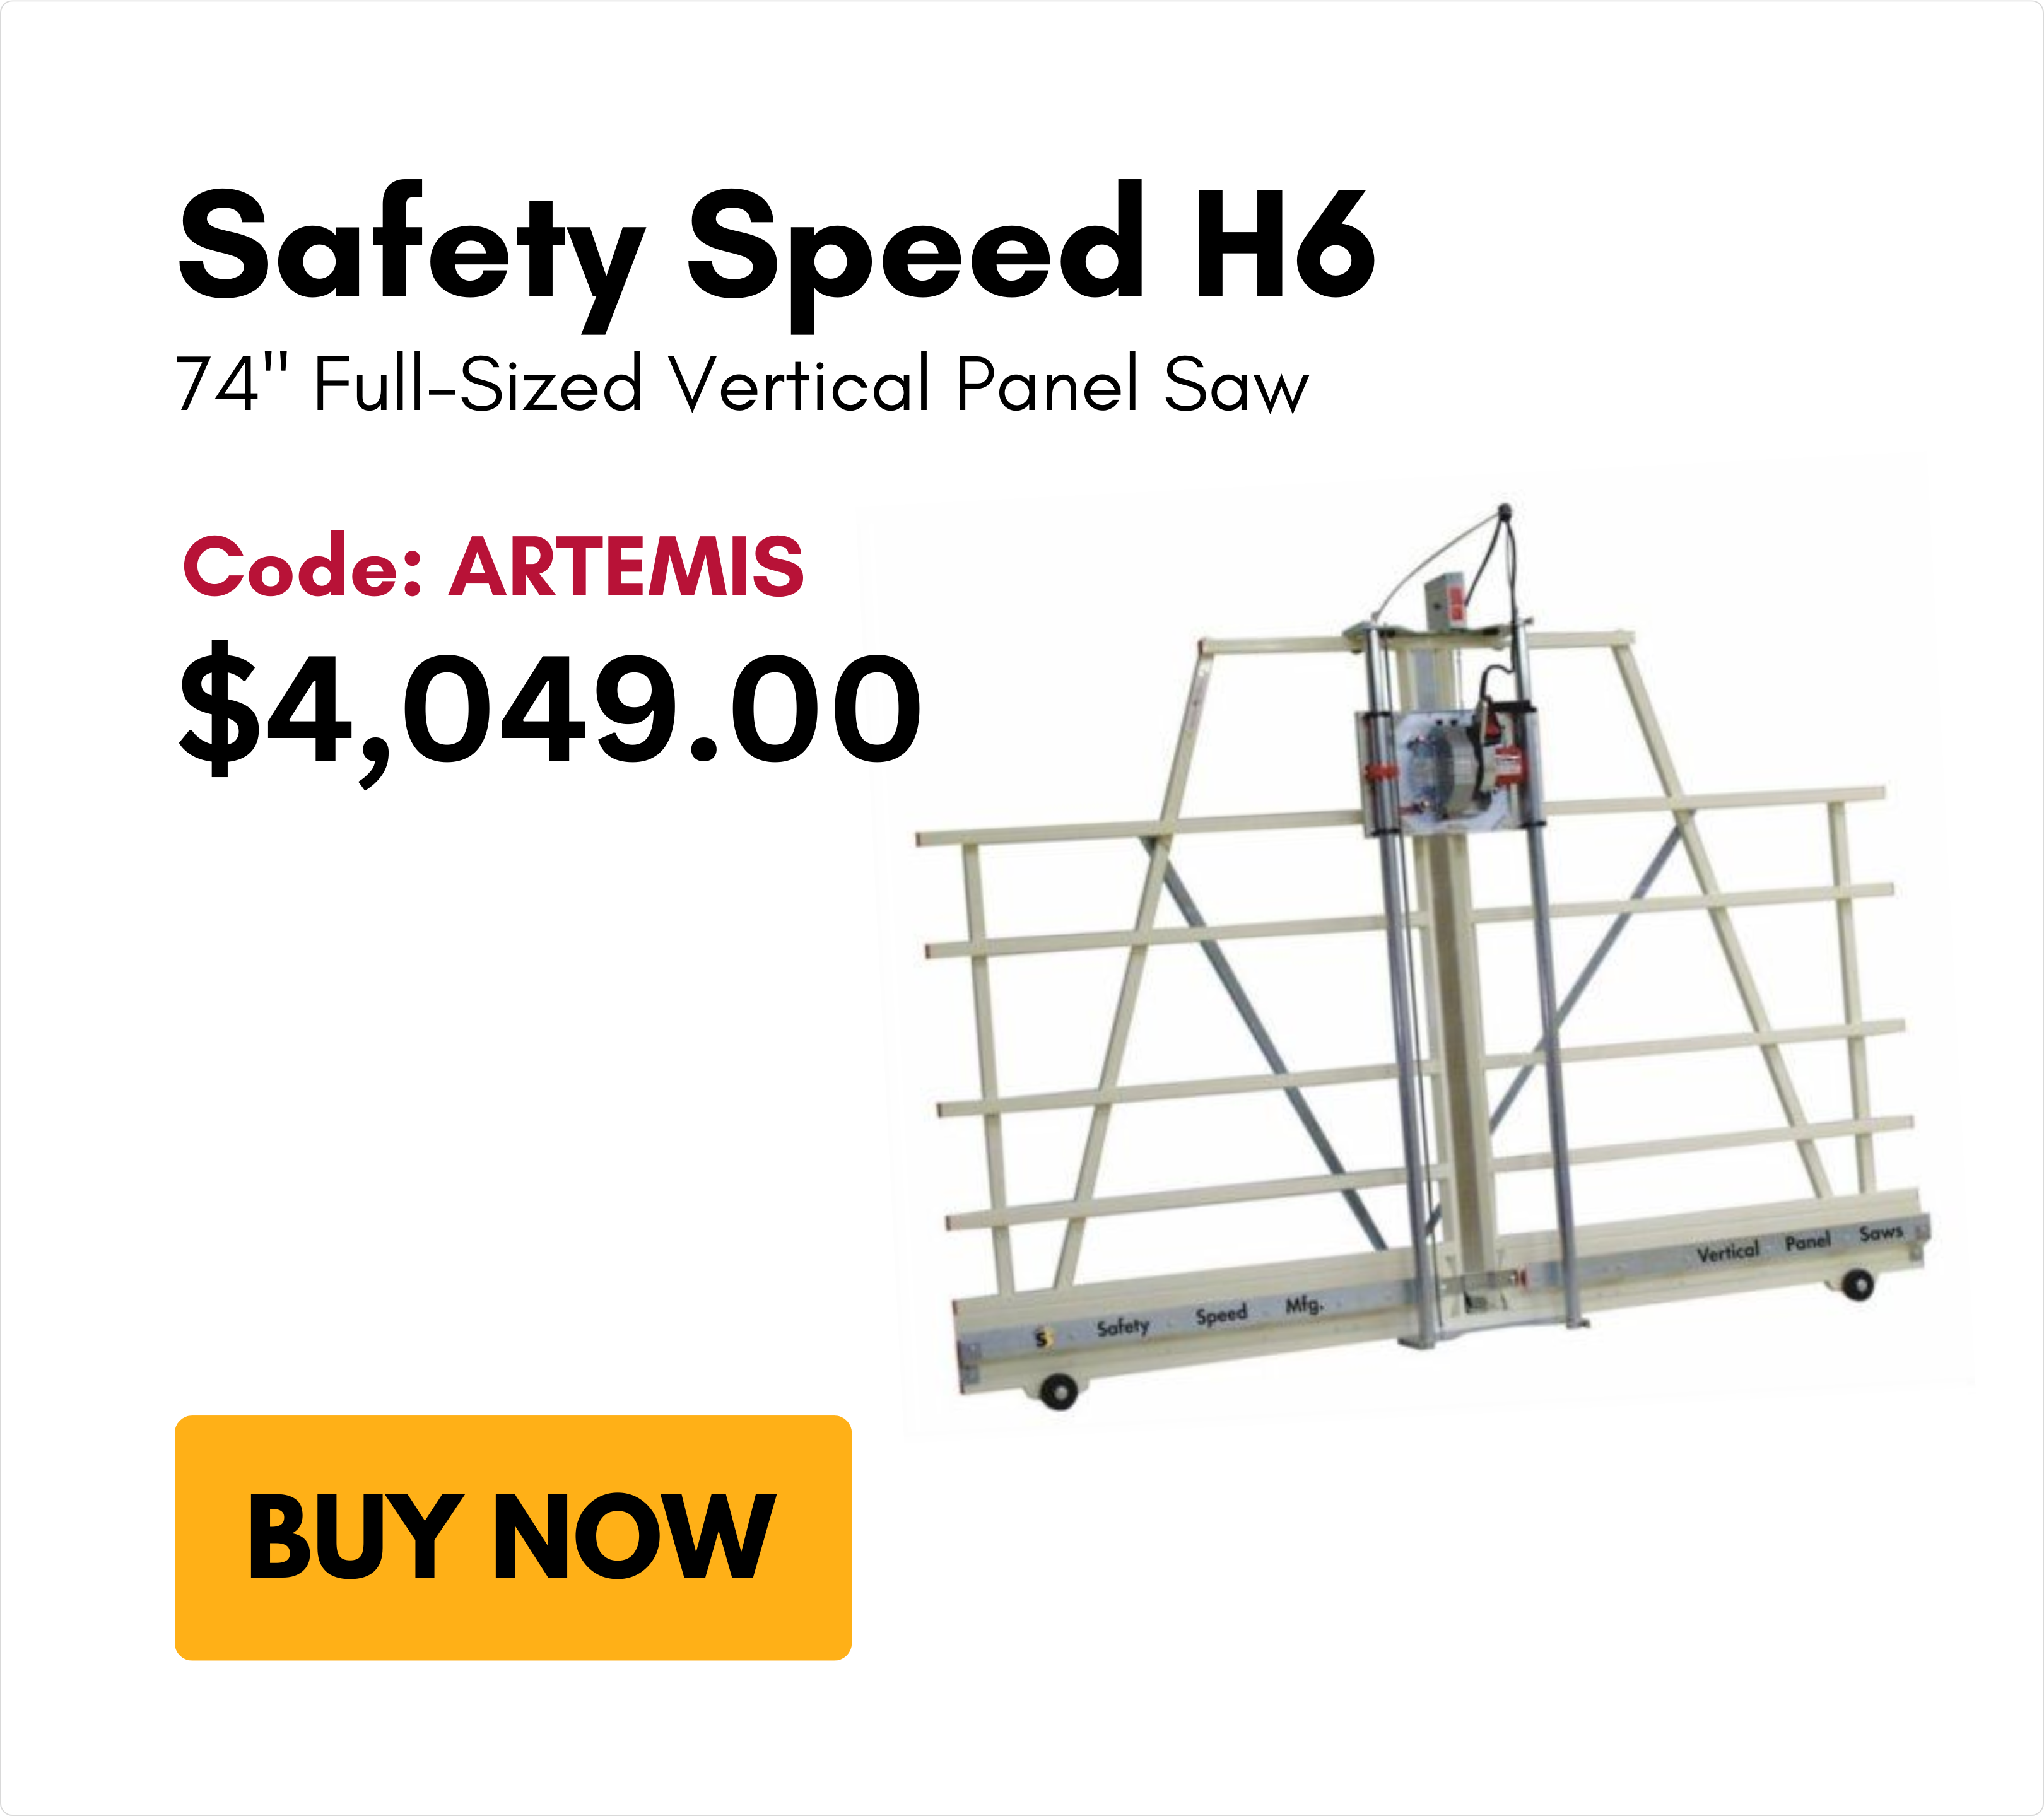 Safety Speed H6 Full-Size 74" Vertical Panel Saw with code ARTEMIS